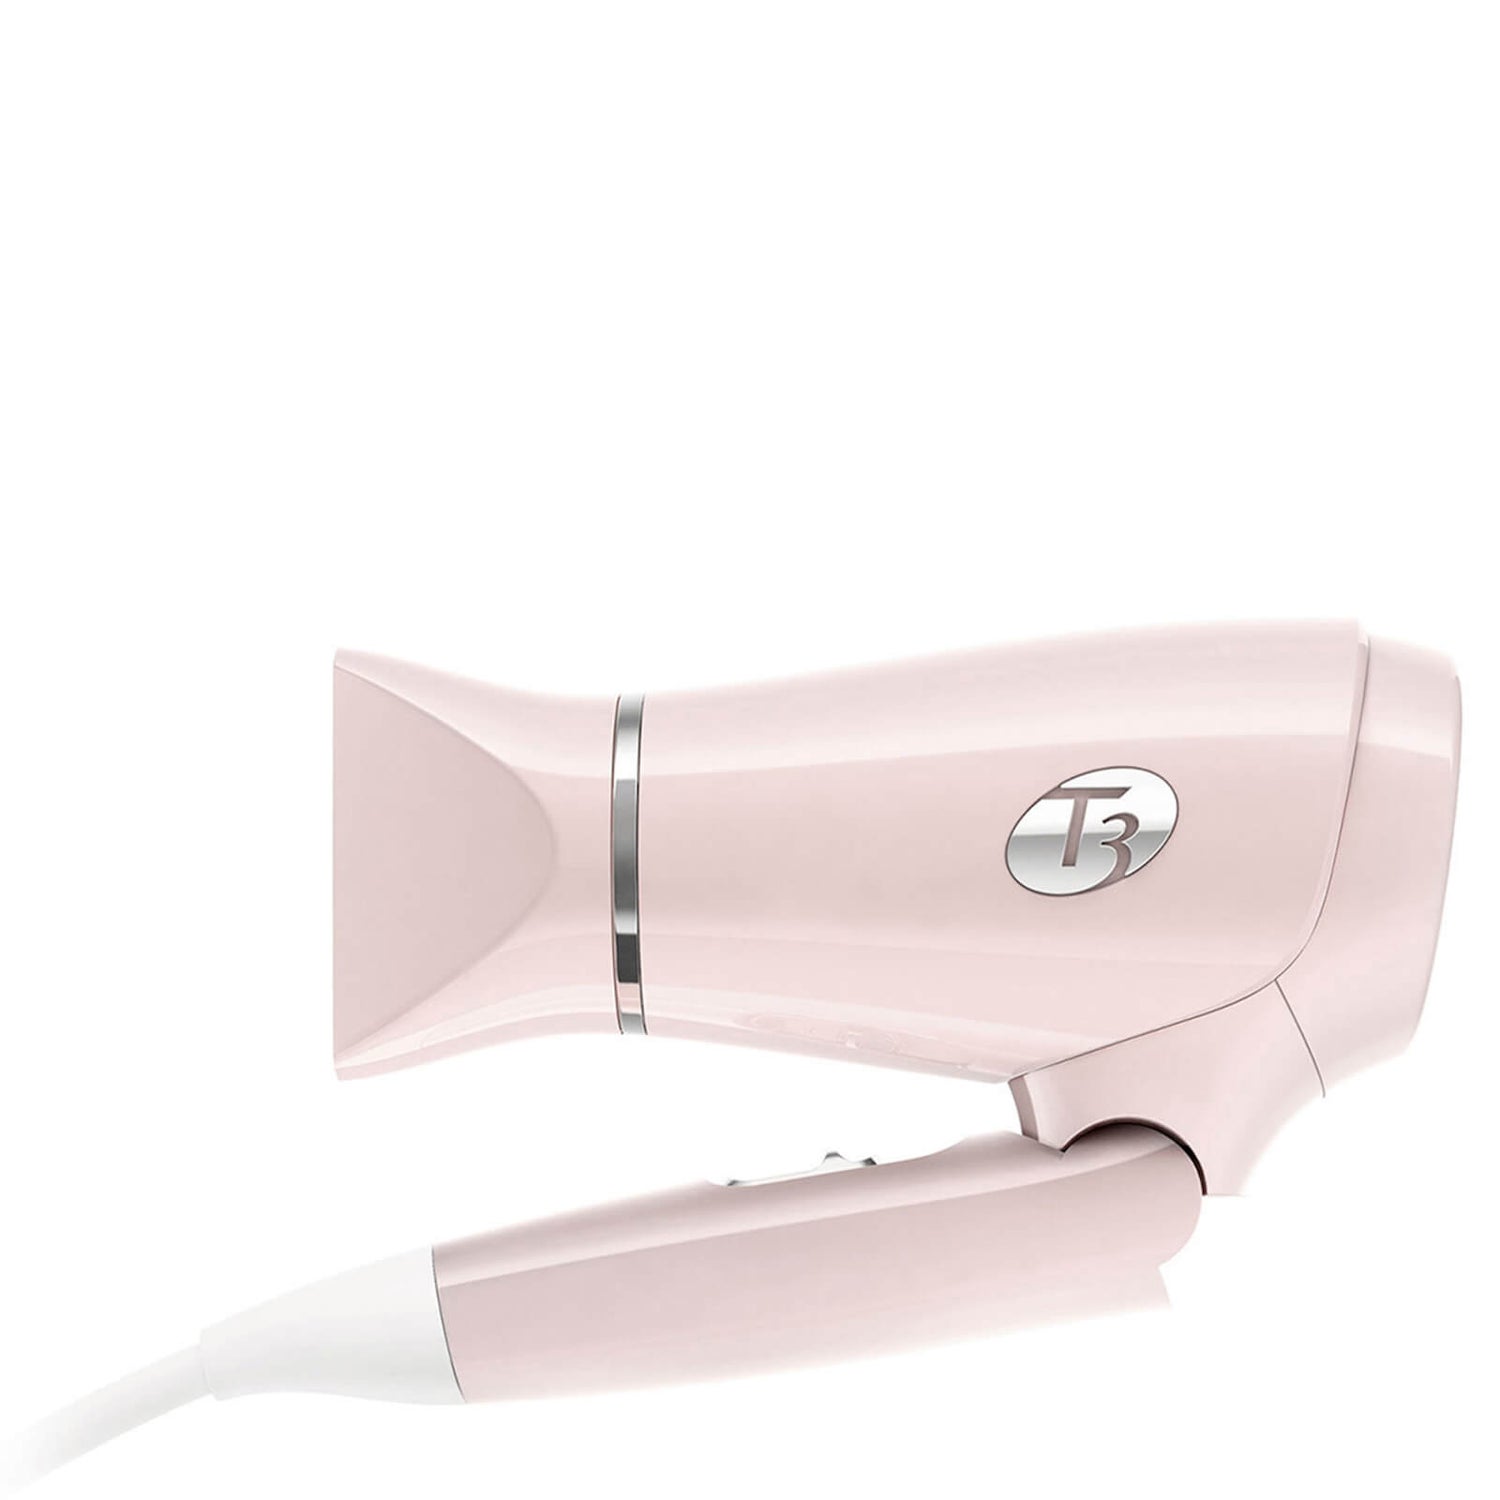 T3 Featherweight Mini Compact Hair Dryer - Pink